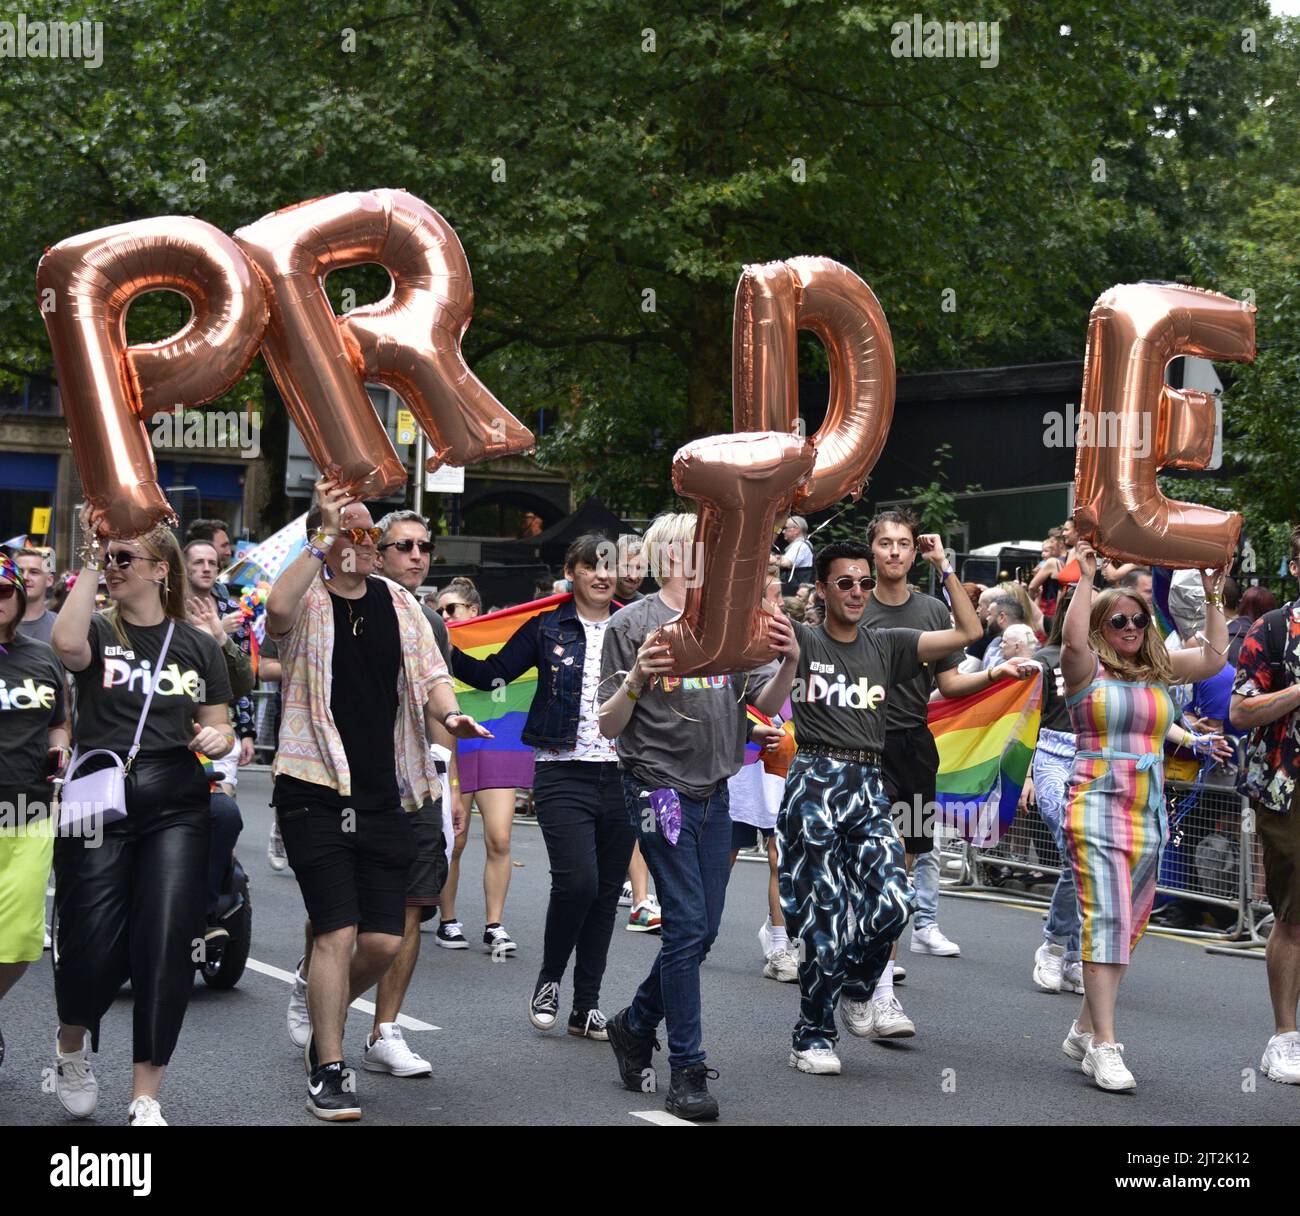 Manchester, UK. 27th August, 2022. A group carry inflatable letters to spell 'Pride'. Participants take part in the LGBTQ+ Pride parade, central Manchester, UK, as LGBTQ+ Pride continues over the Bank Holiday weekend 26th to 29th August. Organisers say: 'Manchester Pride is one of the UK's leading LGBTQ+ charities. Our vision is a world where LGBTQ+ people are free to live and love without prejudice. We’re part of a global Pride movement celebrating LGBTQ+ equality and challenging discrimination.' Credit: Terry Waller/Alamy Live News Stock Photo